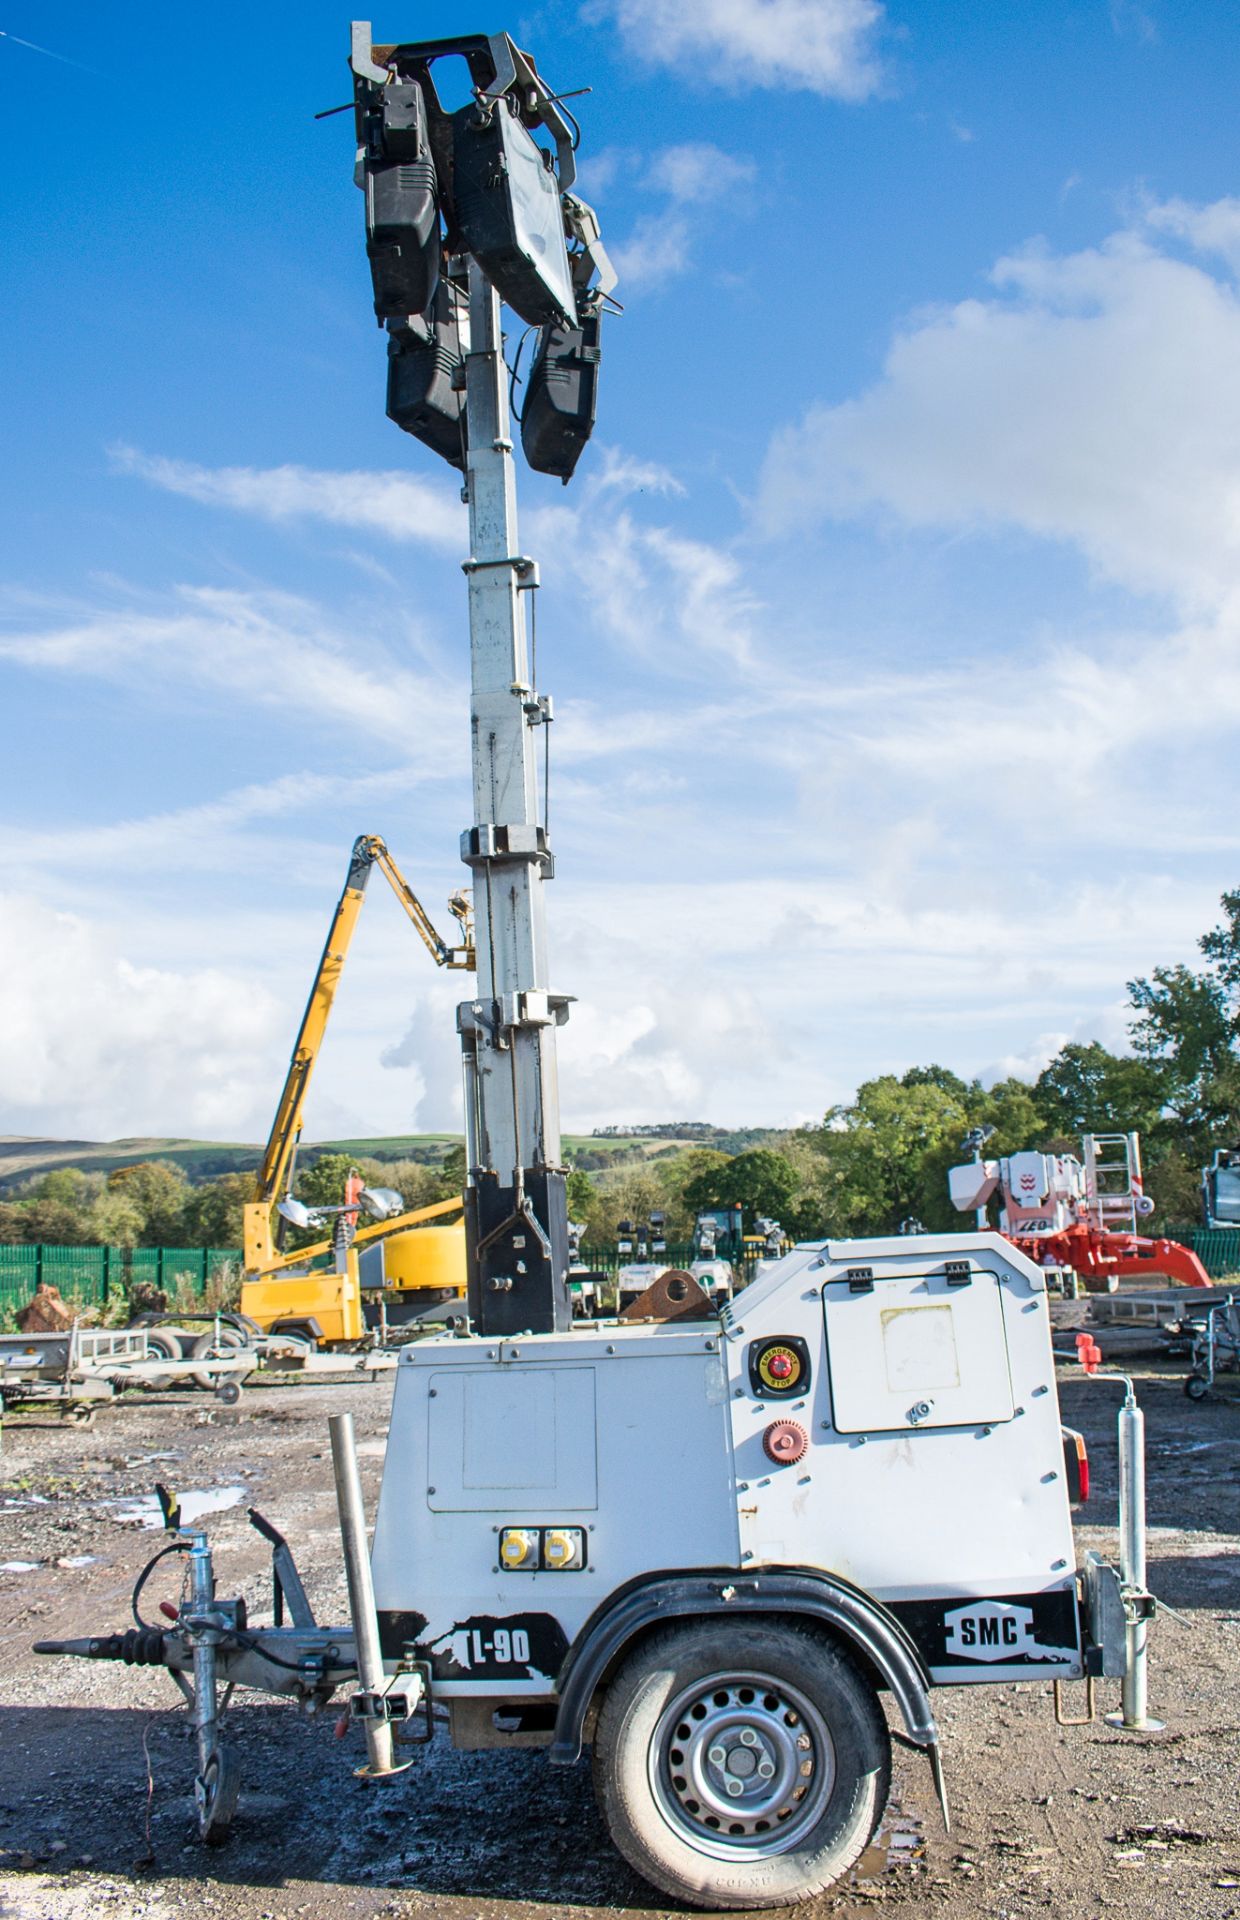 SMC TL-90 diesel driven mobile lighting tower Year: 2012 S/N: 1210011 Recorded hours: 6998 R380206 - Image 5 of 8